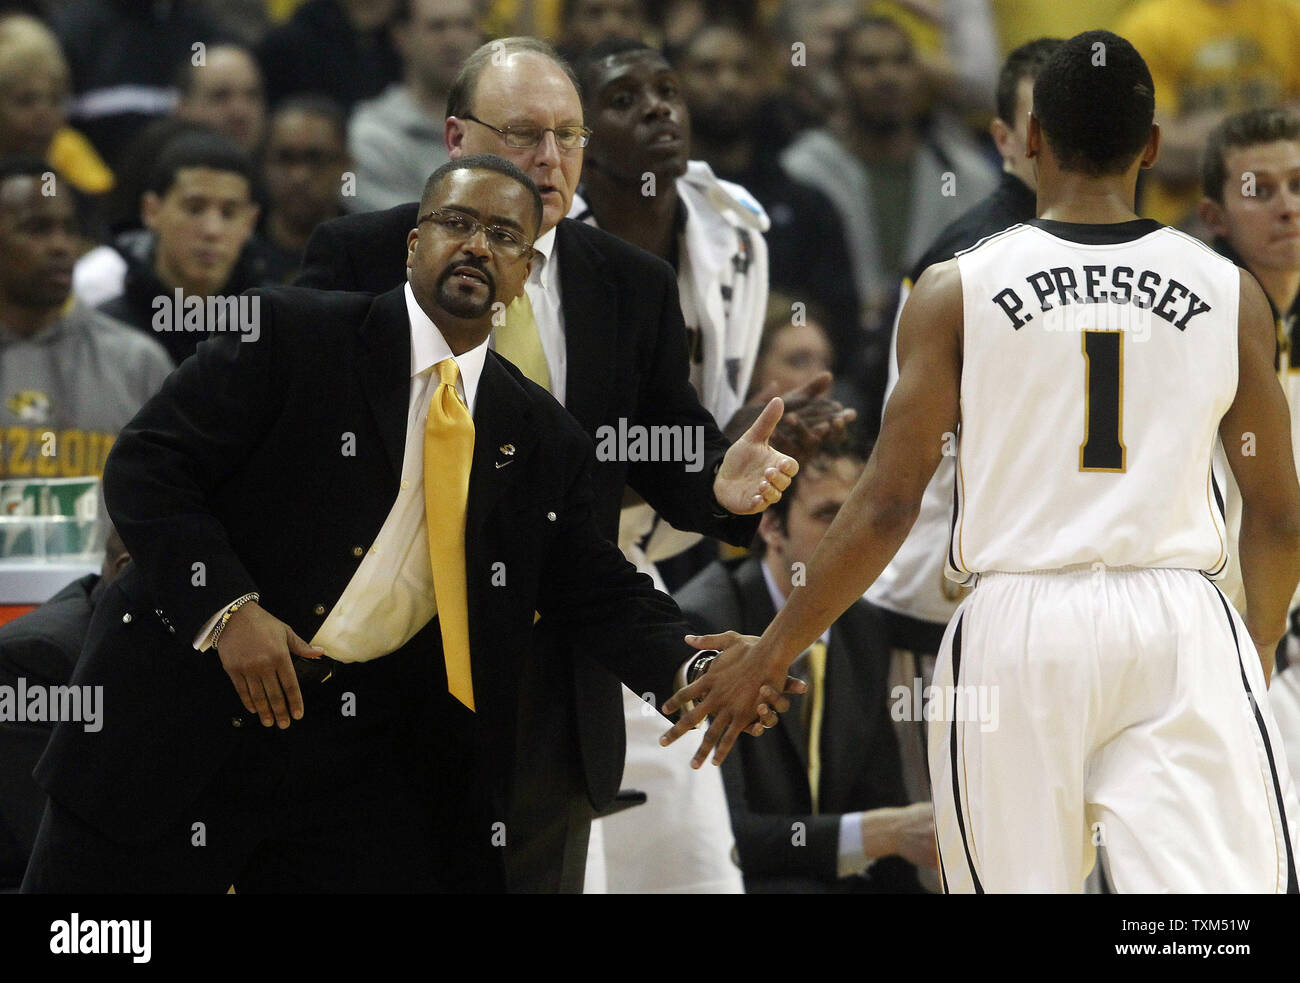 Missouri Tigers head basketball coach Frank Haith shakes the hand of Phil  Pressey as he takes a break in the first half against the Kansas Jayhawks  at the Mizzou Arena in Columbia,